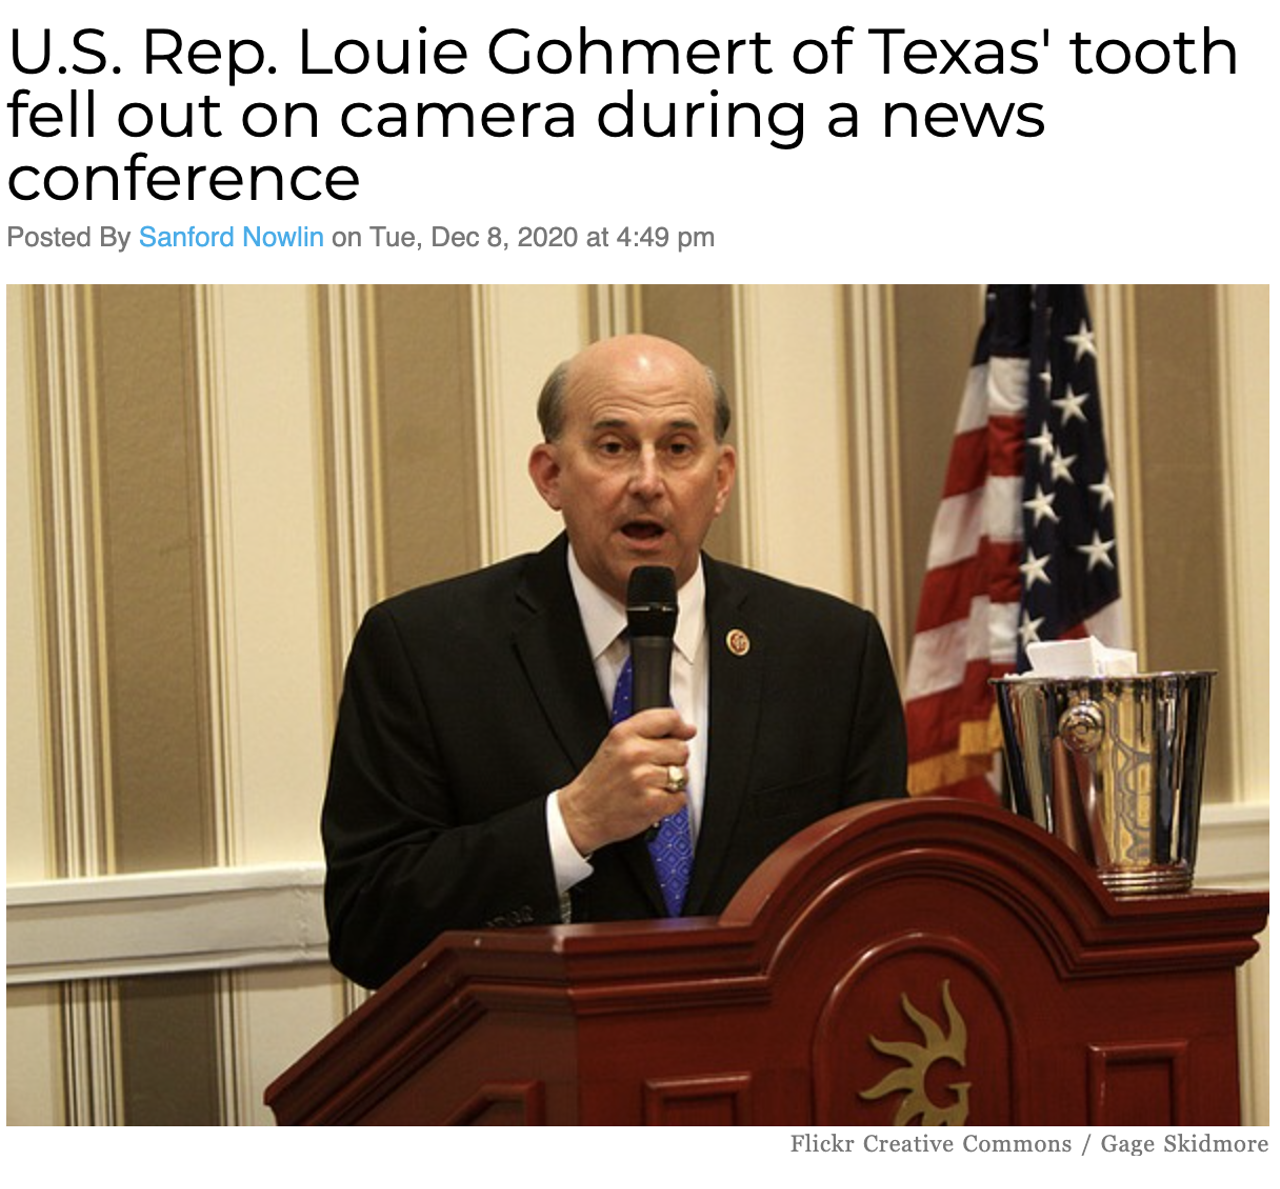 With cameras rolling, one of the Tyler Republican Louie Gohmert's front teeth fell out as he spoke to the press. Read more here.